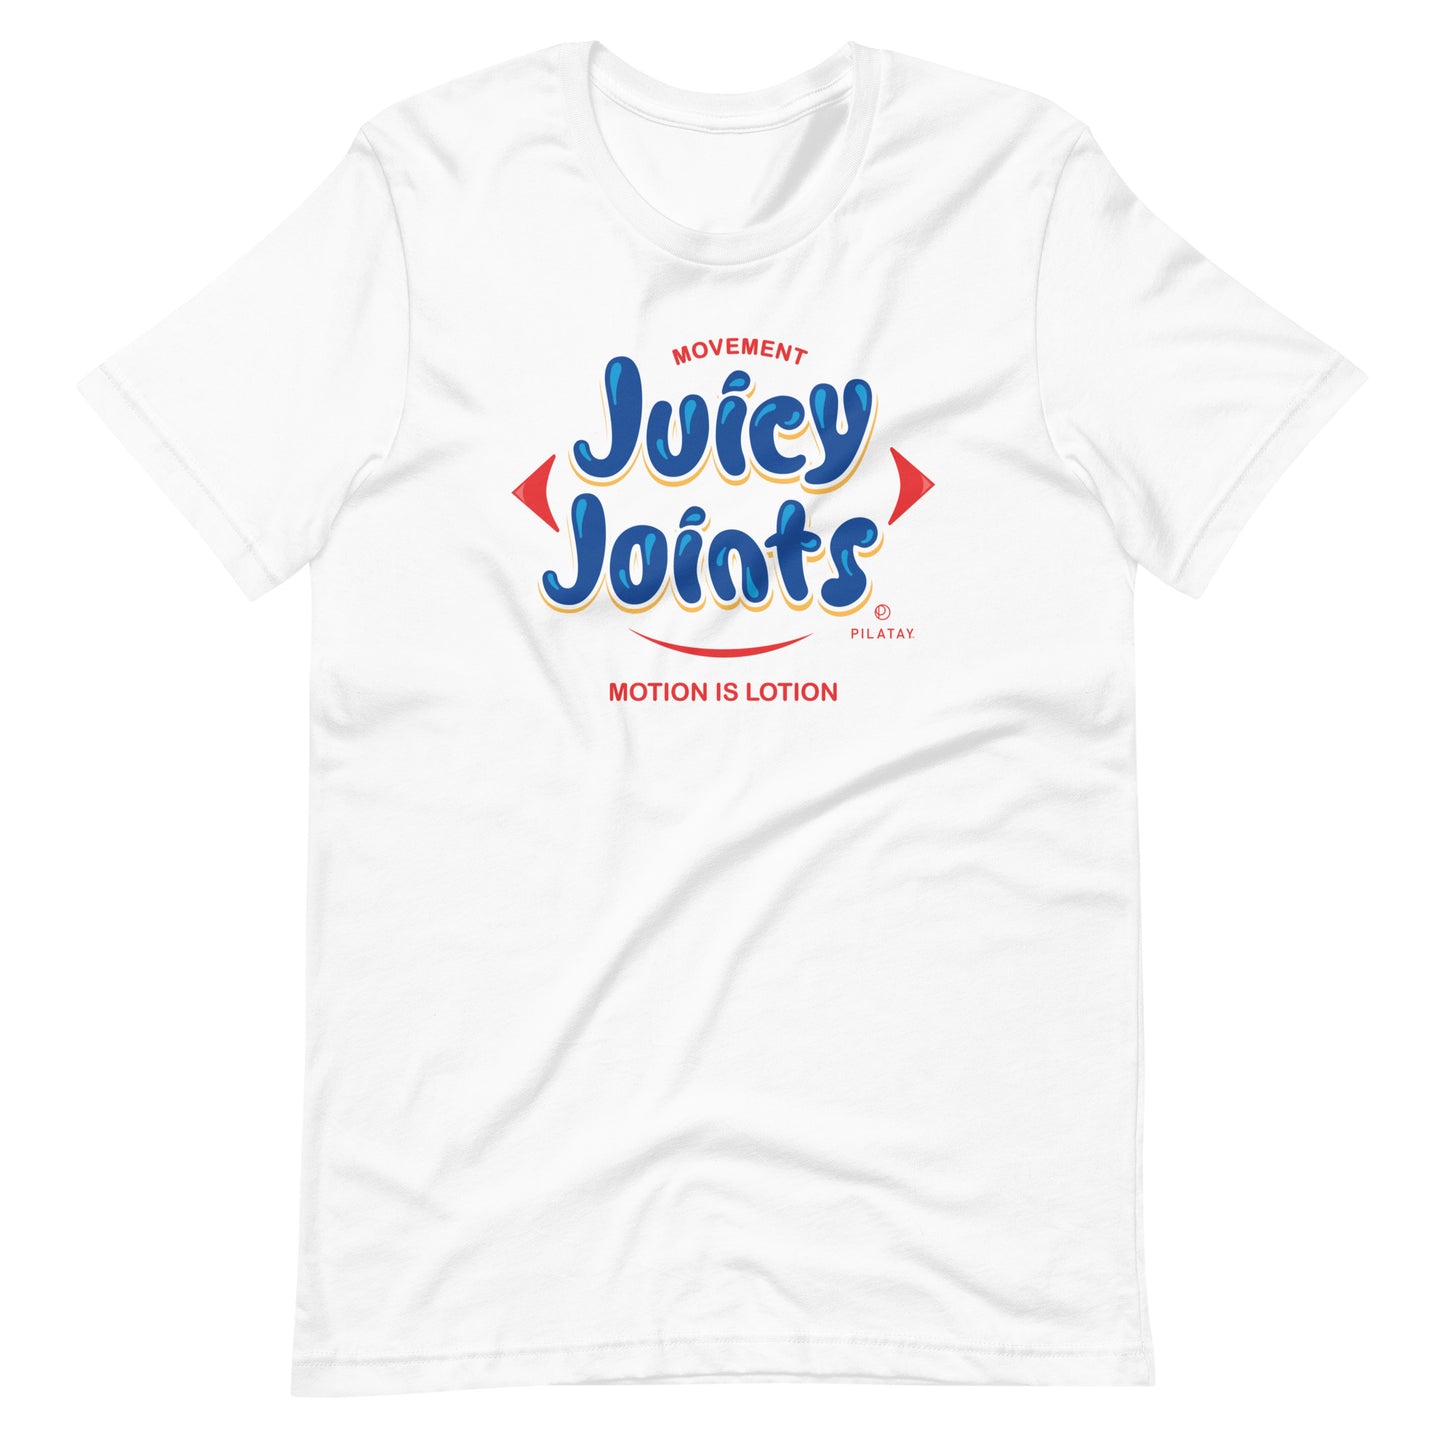 Juicy Joints - Motion is Lotion - Unisex Tee